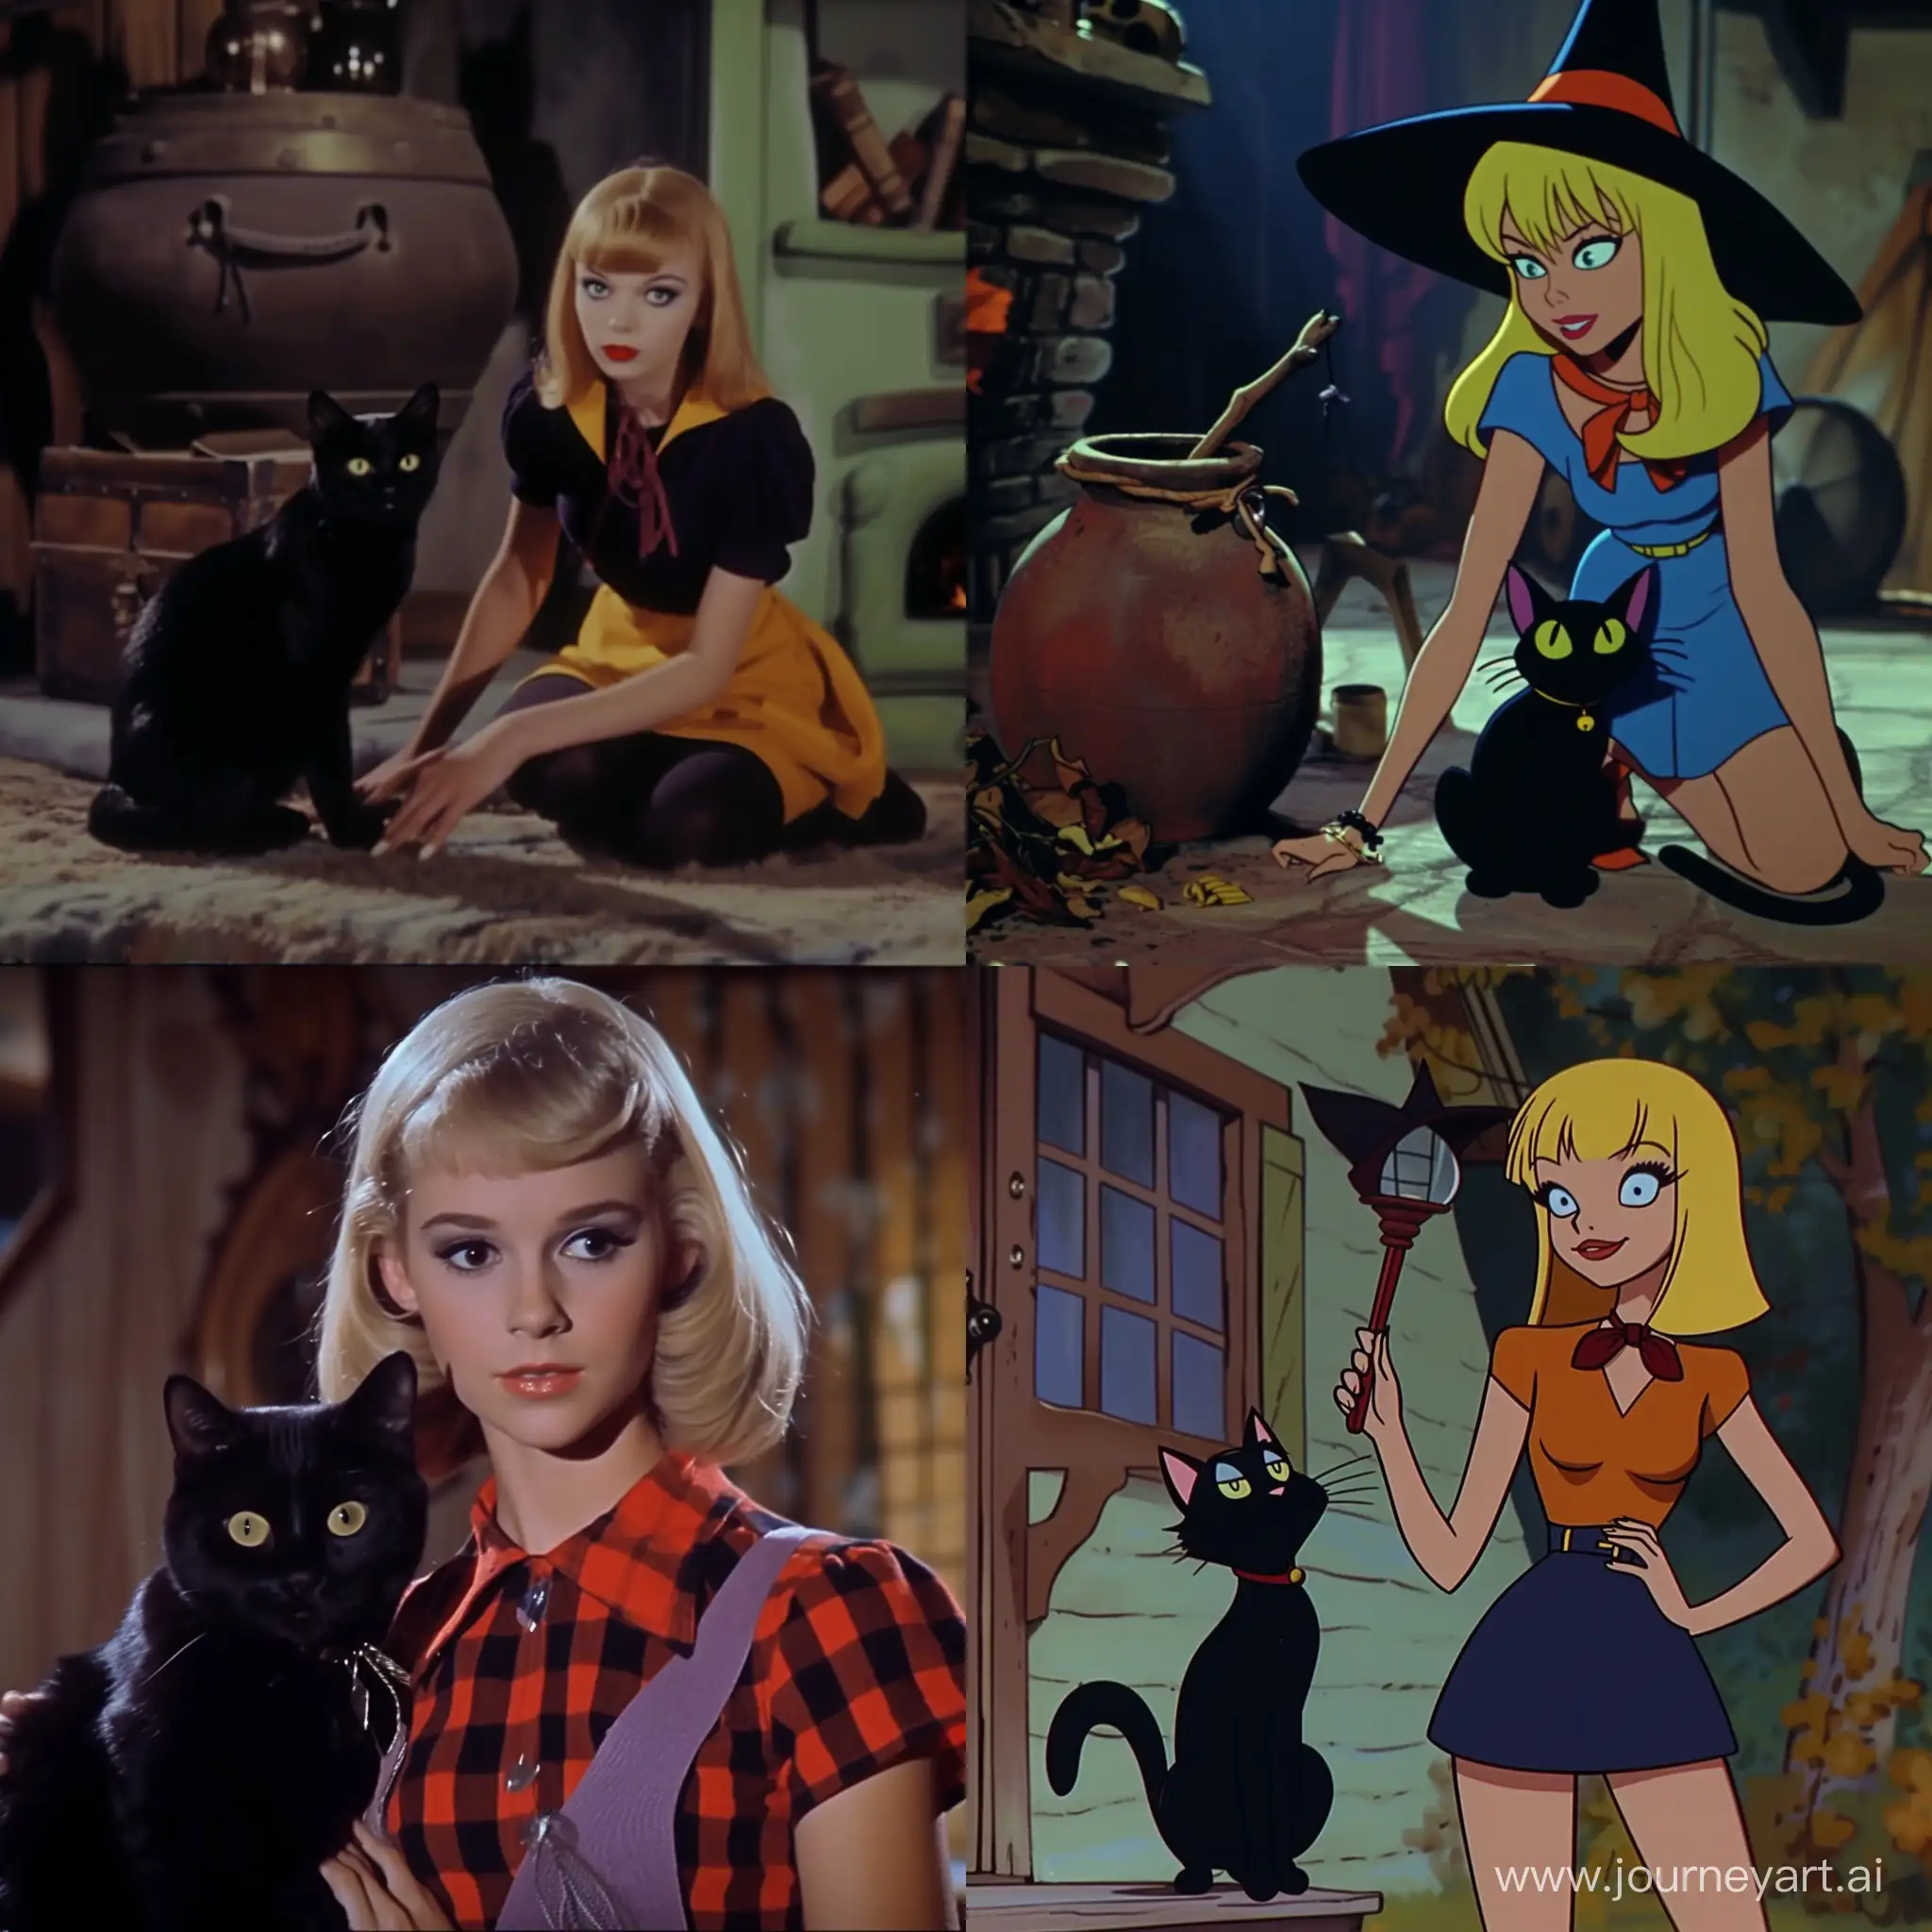 Sabrina the teenage witch and black cat, screenshot from H.R pufnstuf 1969